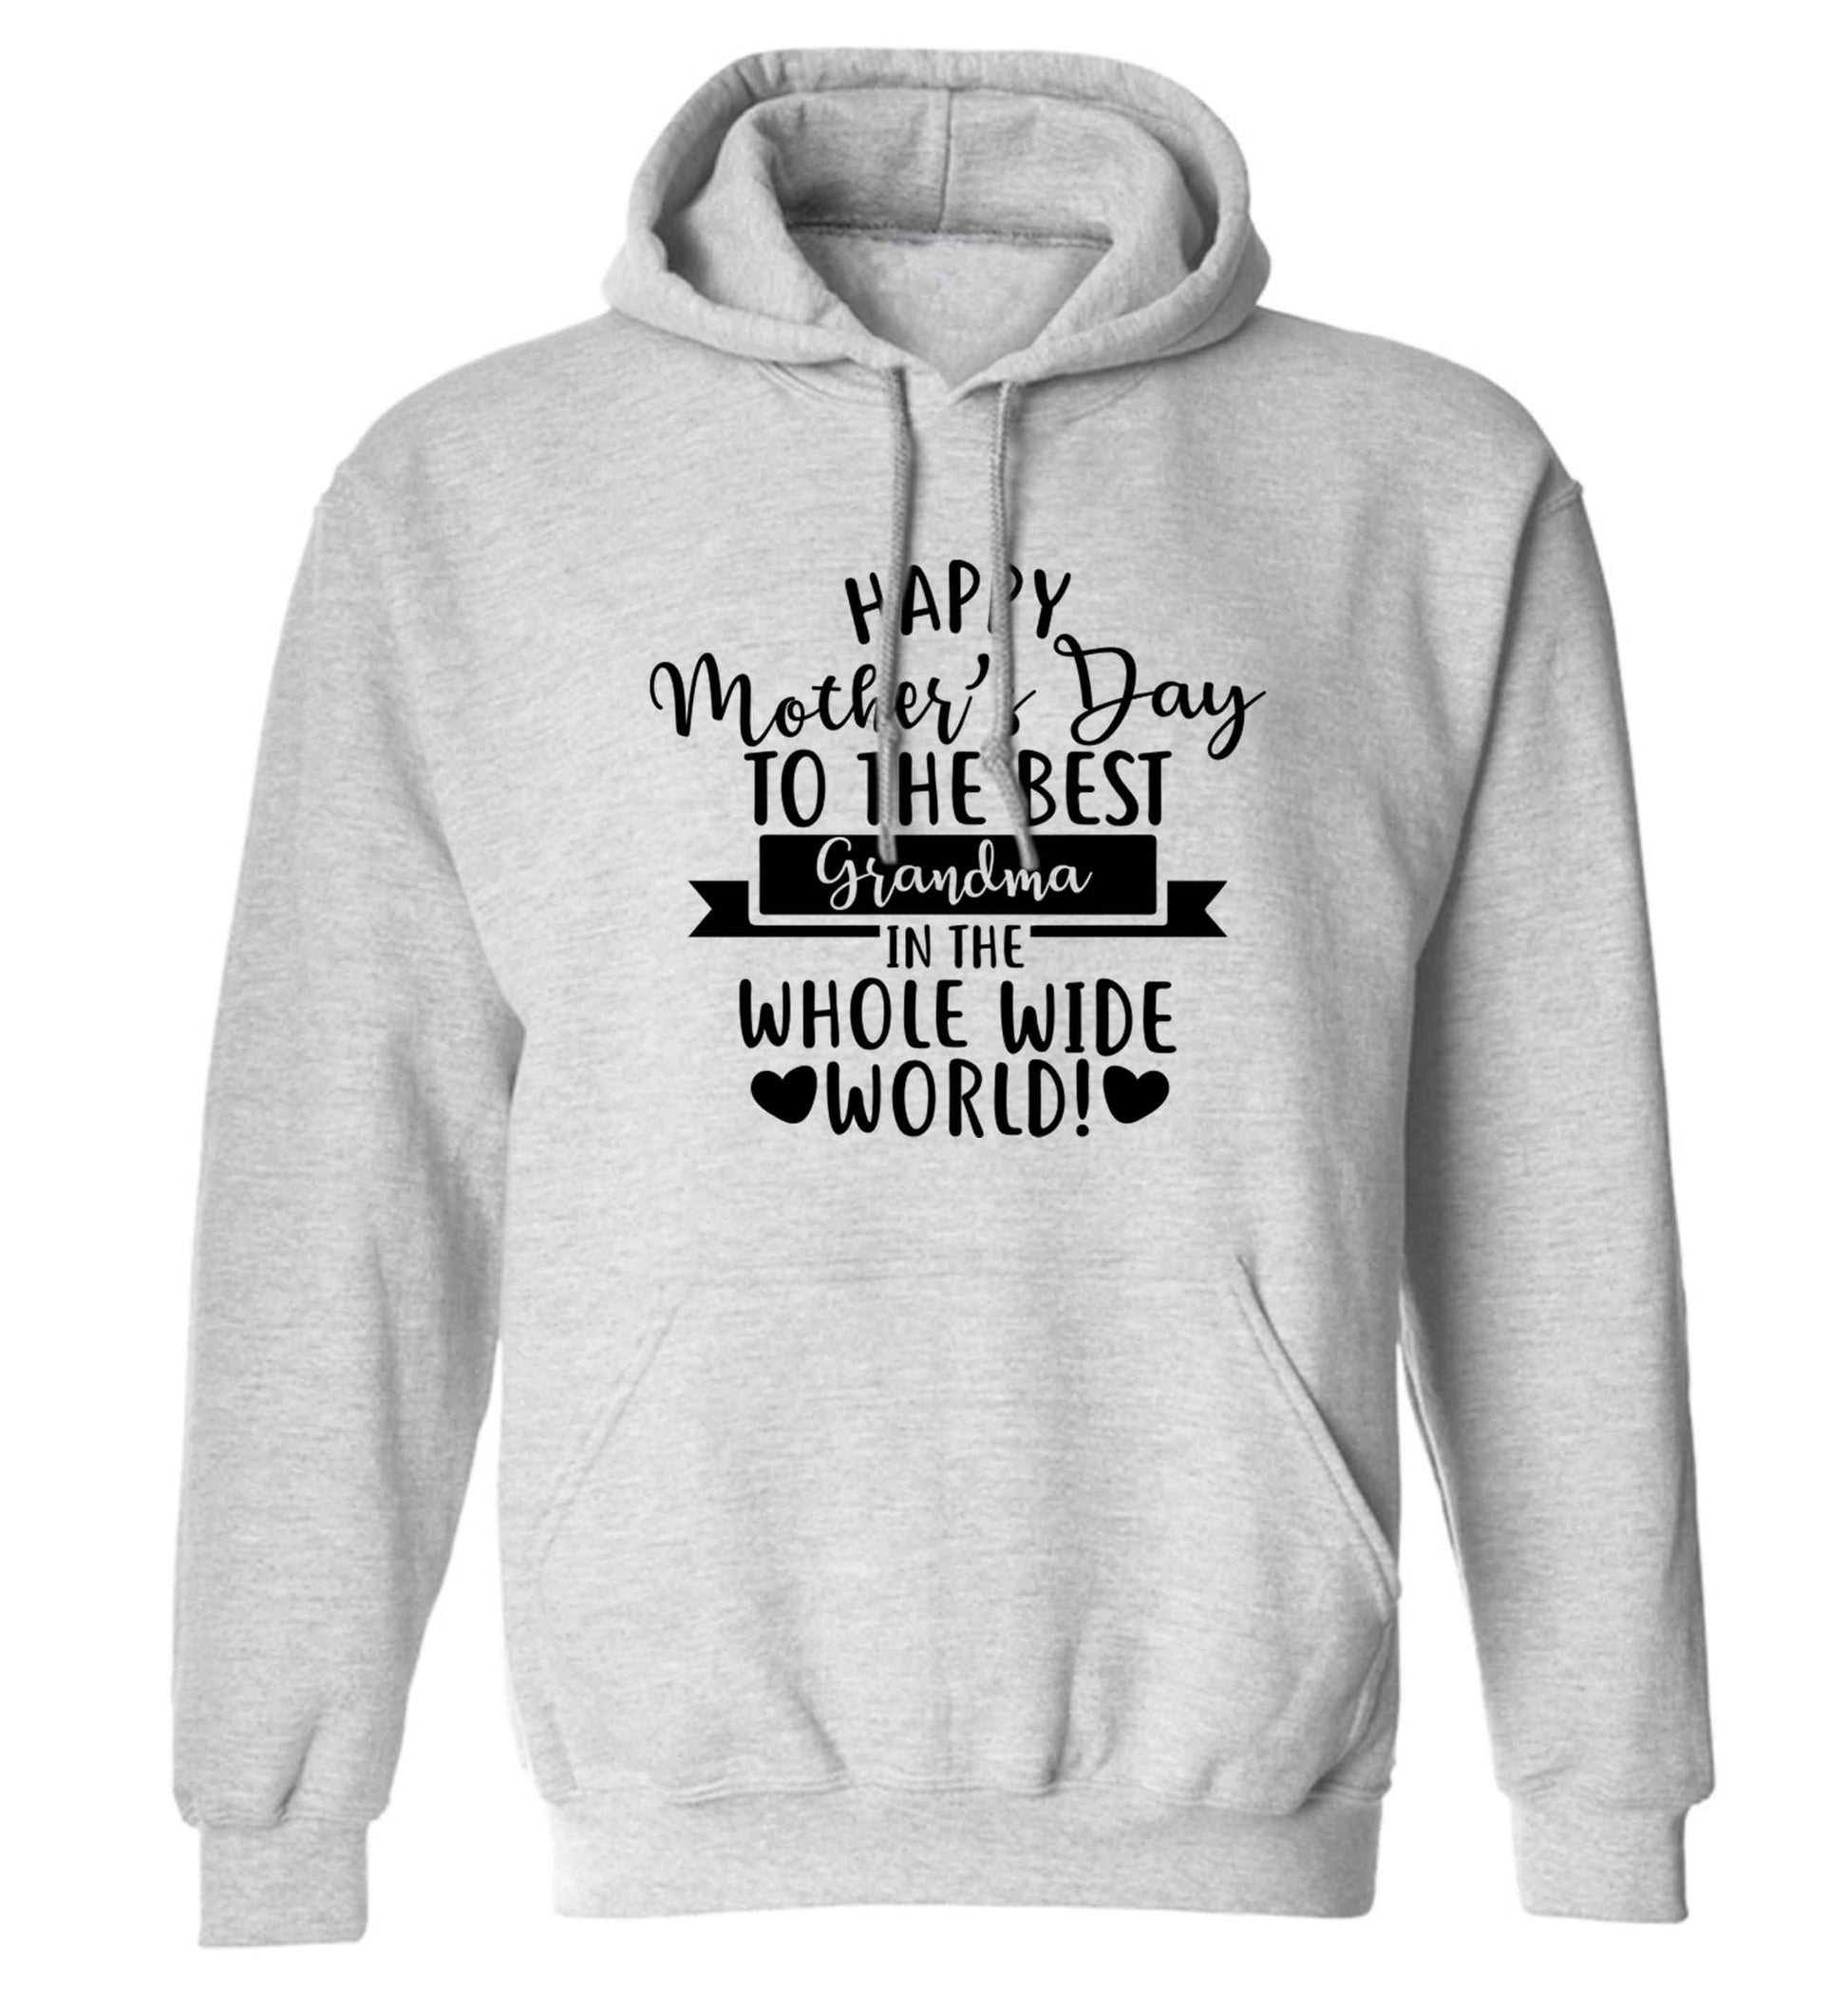 Happy mother's day to the best grandma in the world adults unisex grey hoodie 2XL